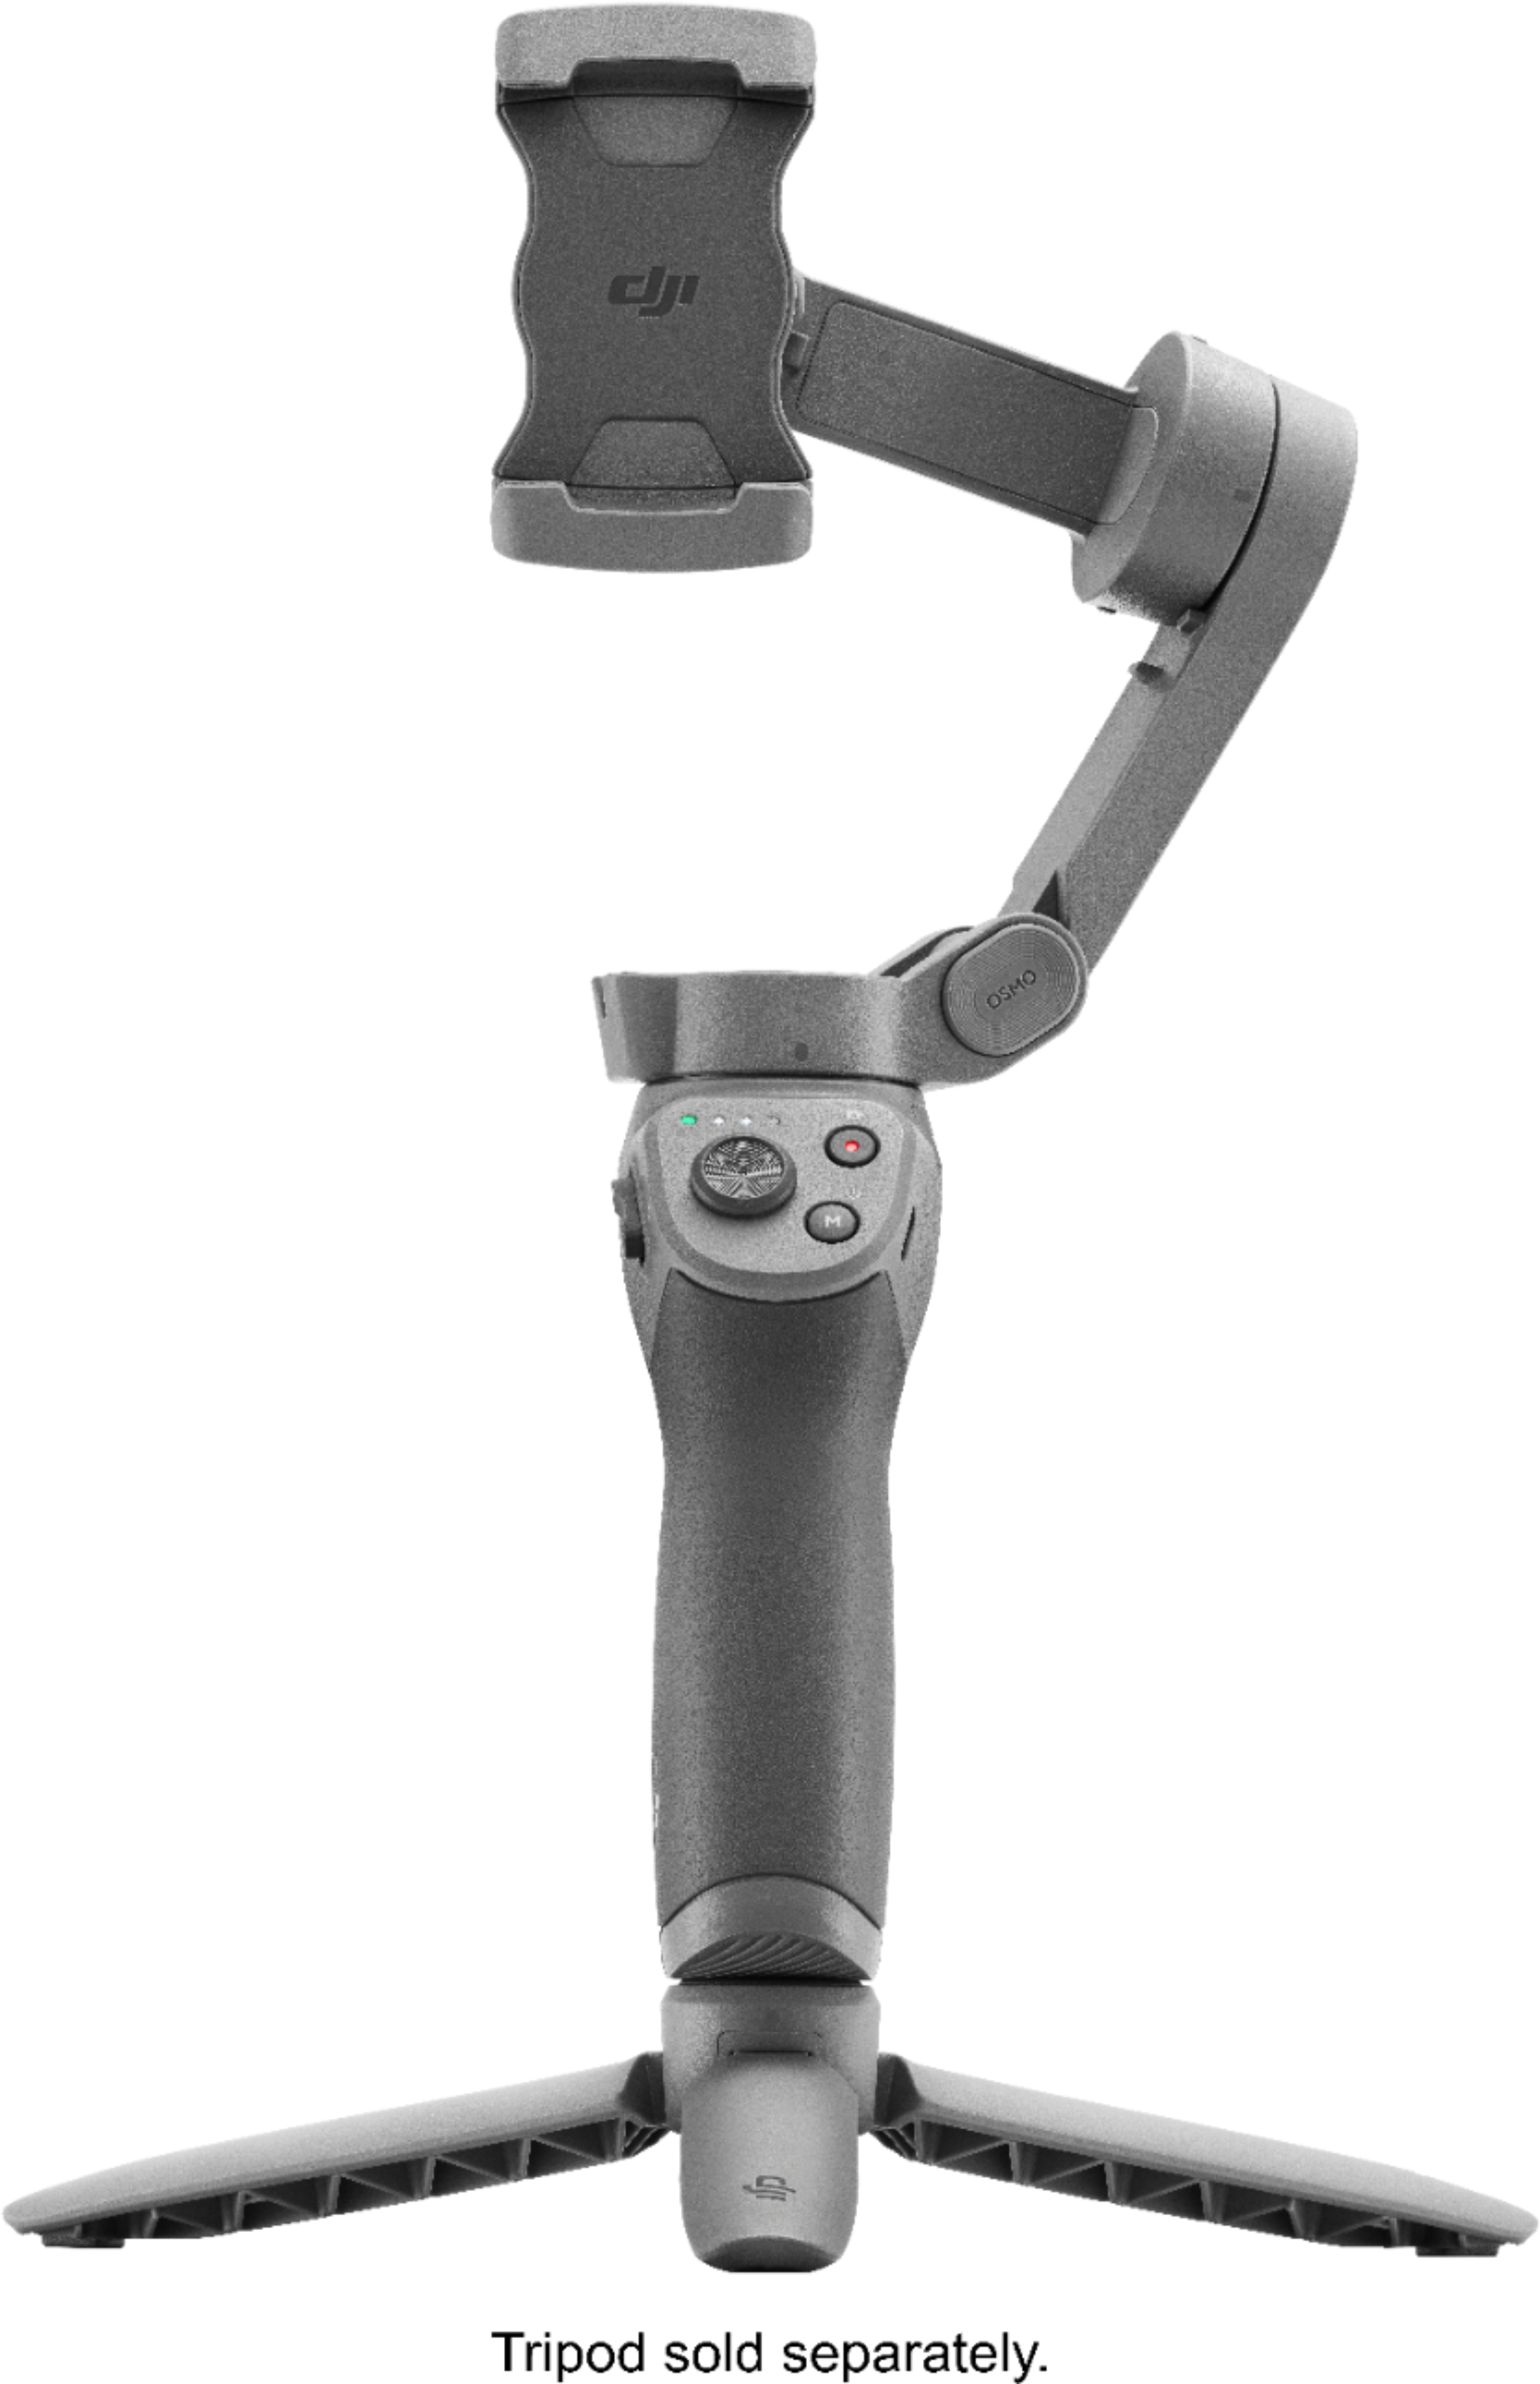 Kig forbi Glæd dig gruppe DJI Osmo Mobile 3 3-Axis Gimbal Stabilizer for Mobile Phones Gray  CP.OS.00000022.01 - Best Buy